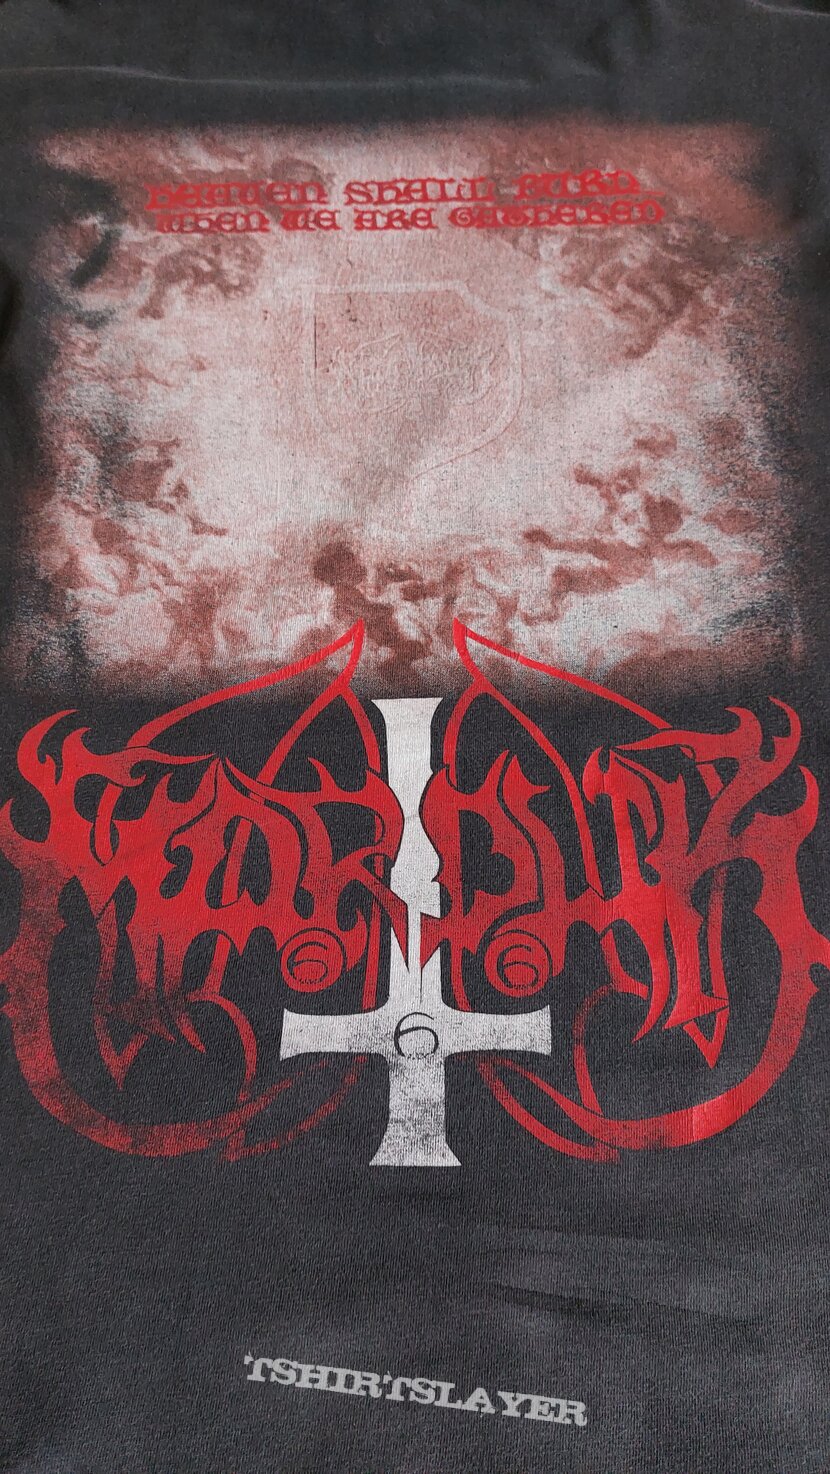 Marduk - Heaven shall burn when we are gathered, LS